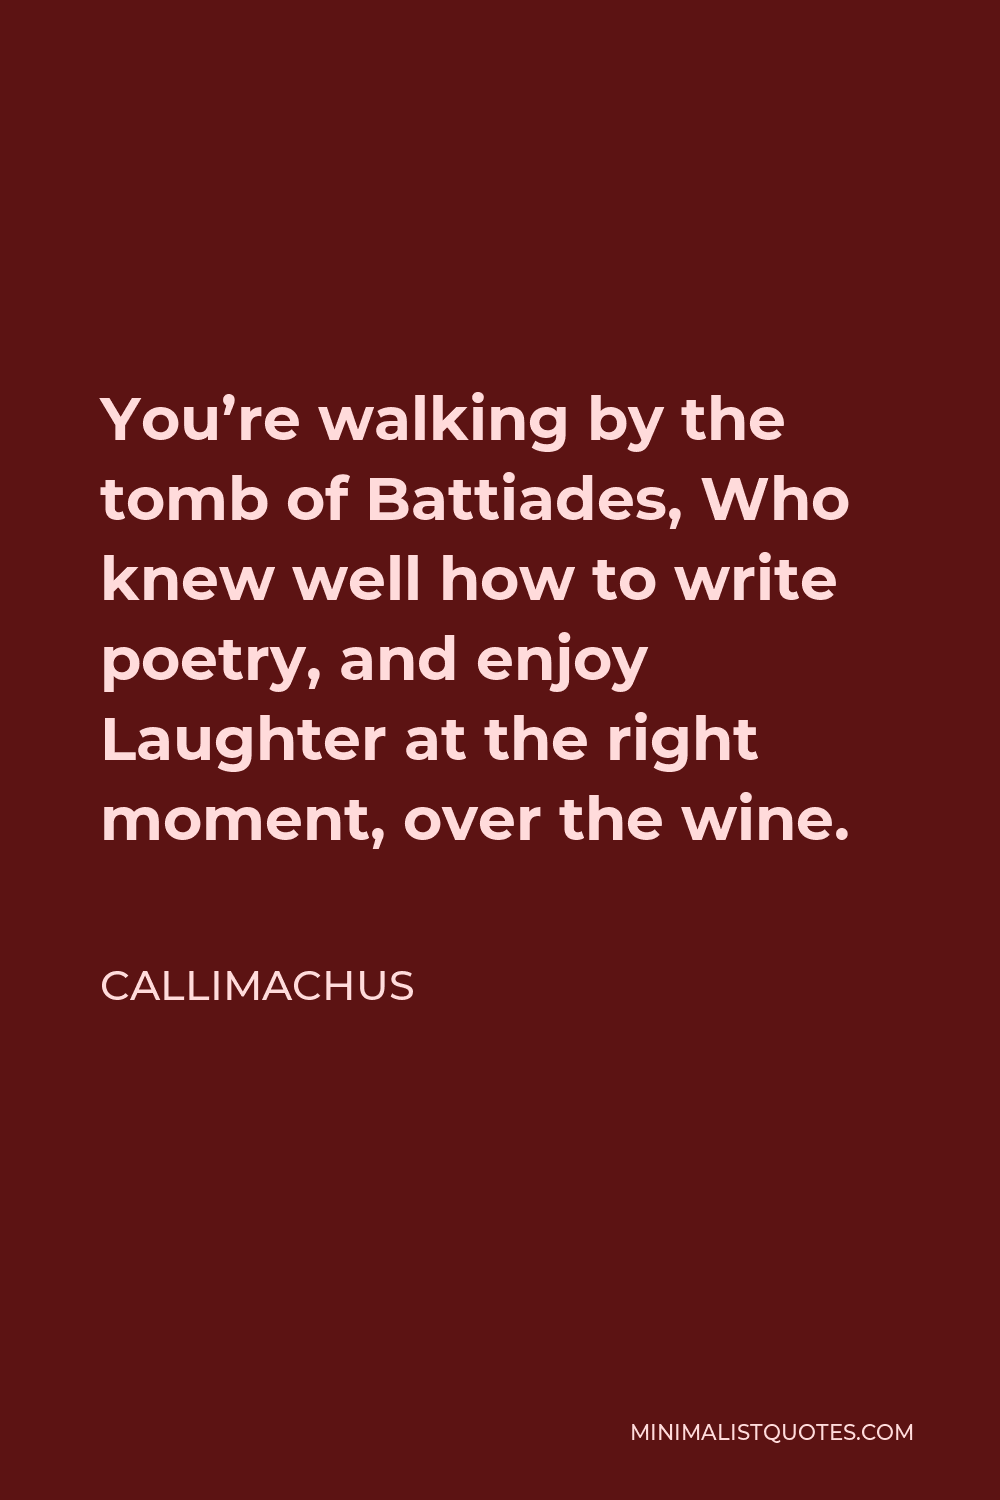 Callimachus Quote - You’re walking by the tomb of Battiades, Who knew well how to write poetry, and enjoy Laughter at the right moment, over the wine.